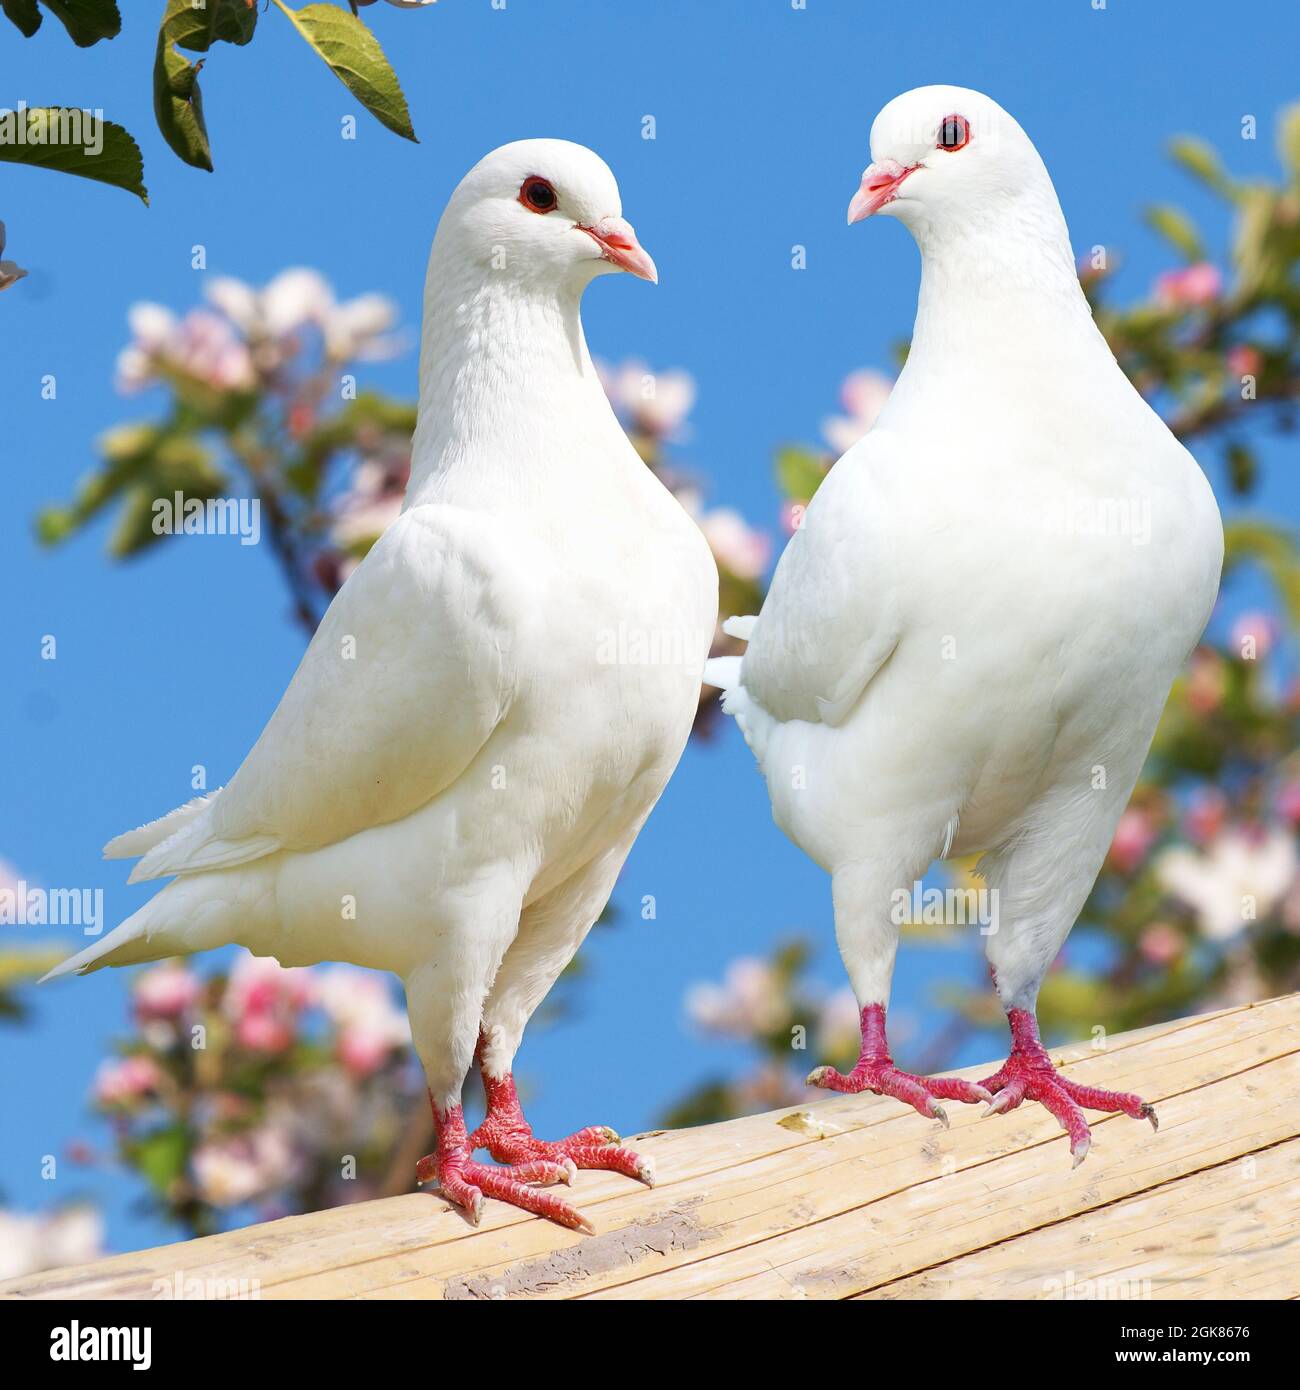 HD white pigeon wallpapers | Peakpx